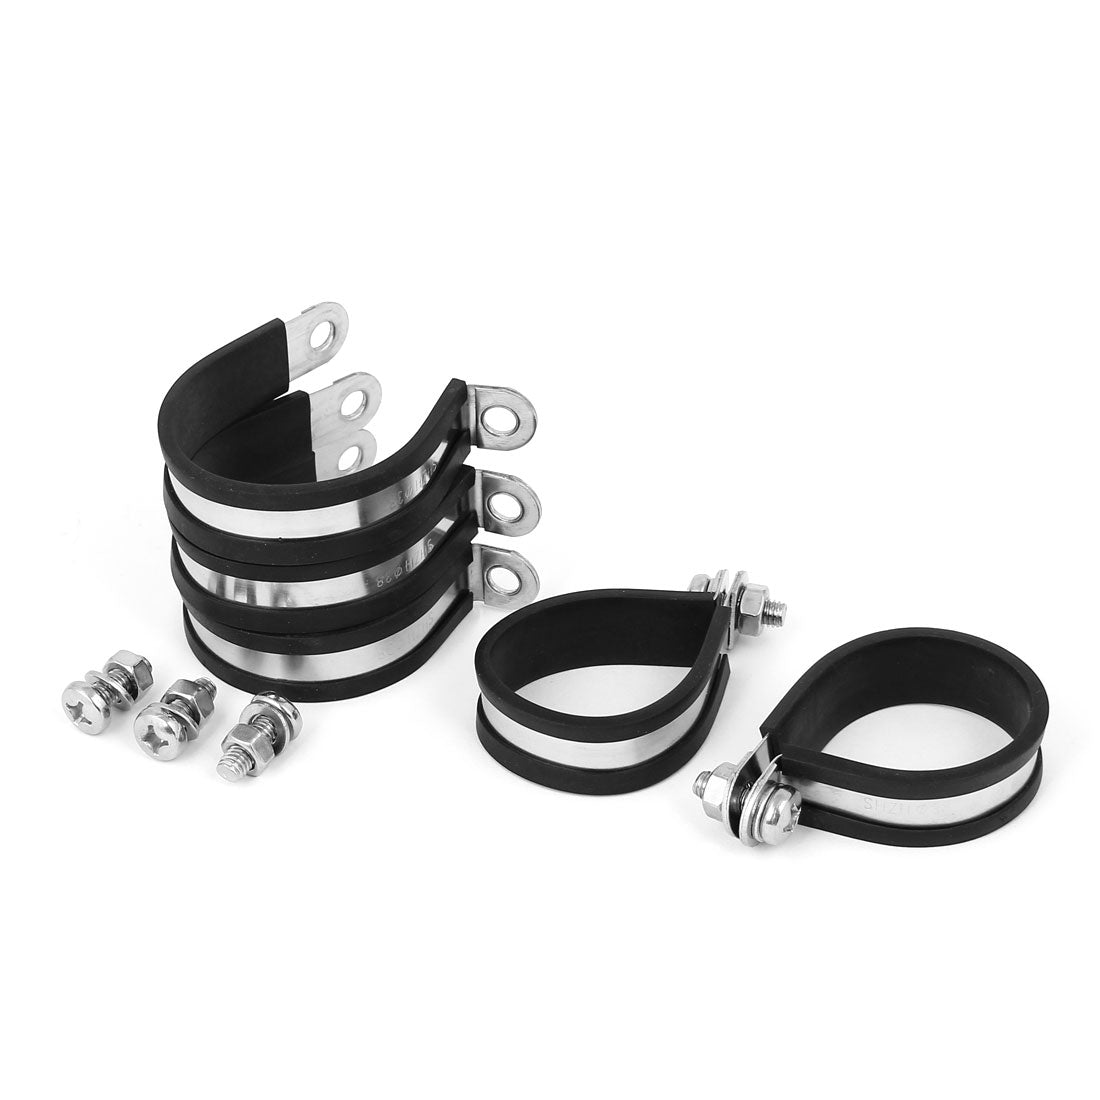 uxcell Uxcell 38mm 304 Stainless Steel EPDM Rubber Lined P Clips Cable Mounting Hose Pipe Clamp 5pcs